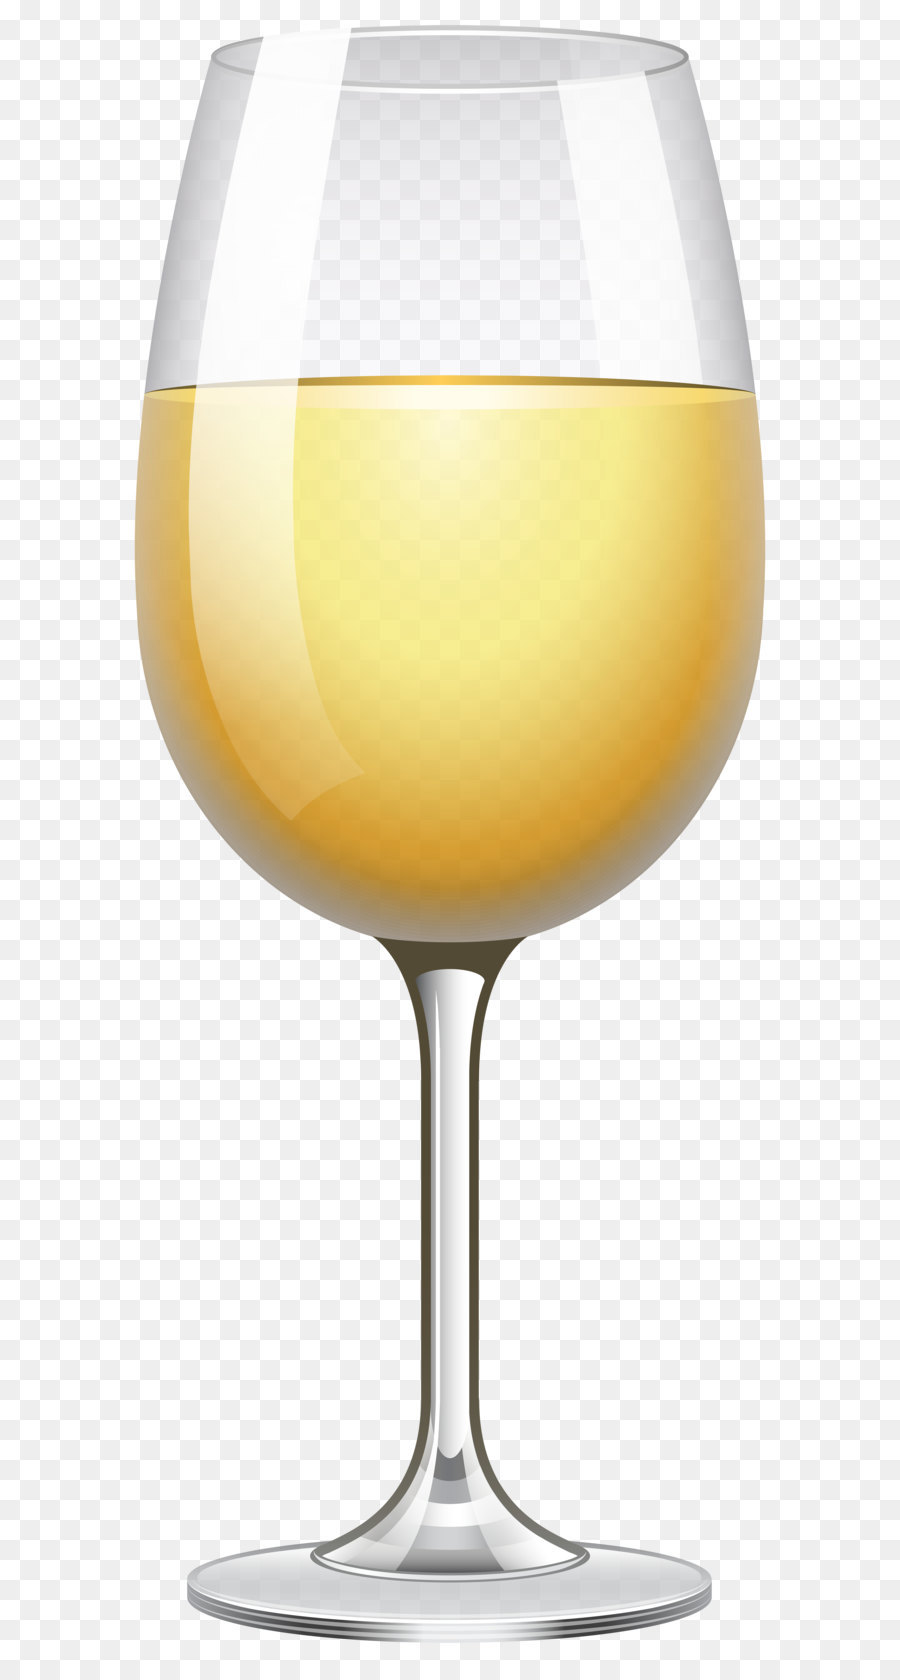 Champagne Glasses Background png download.